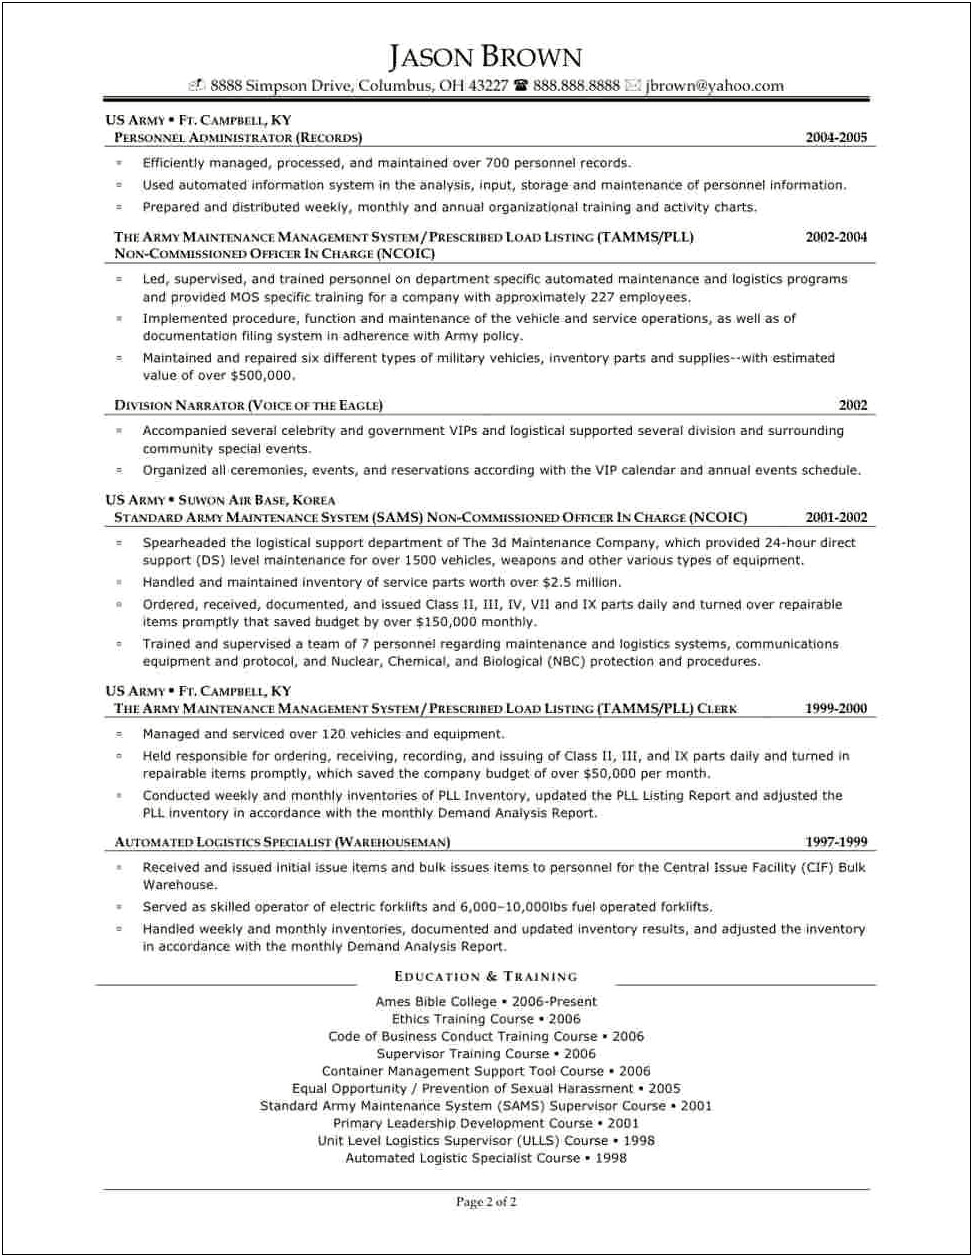 Automated Logistical Specialist Resume Examples